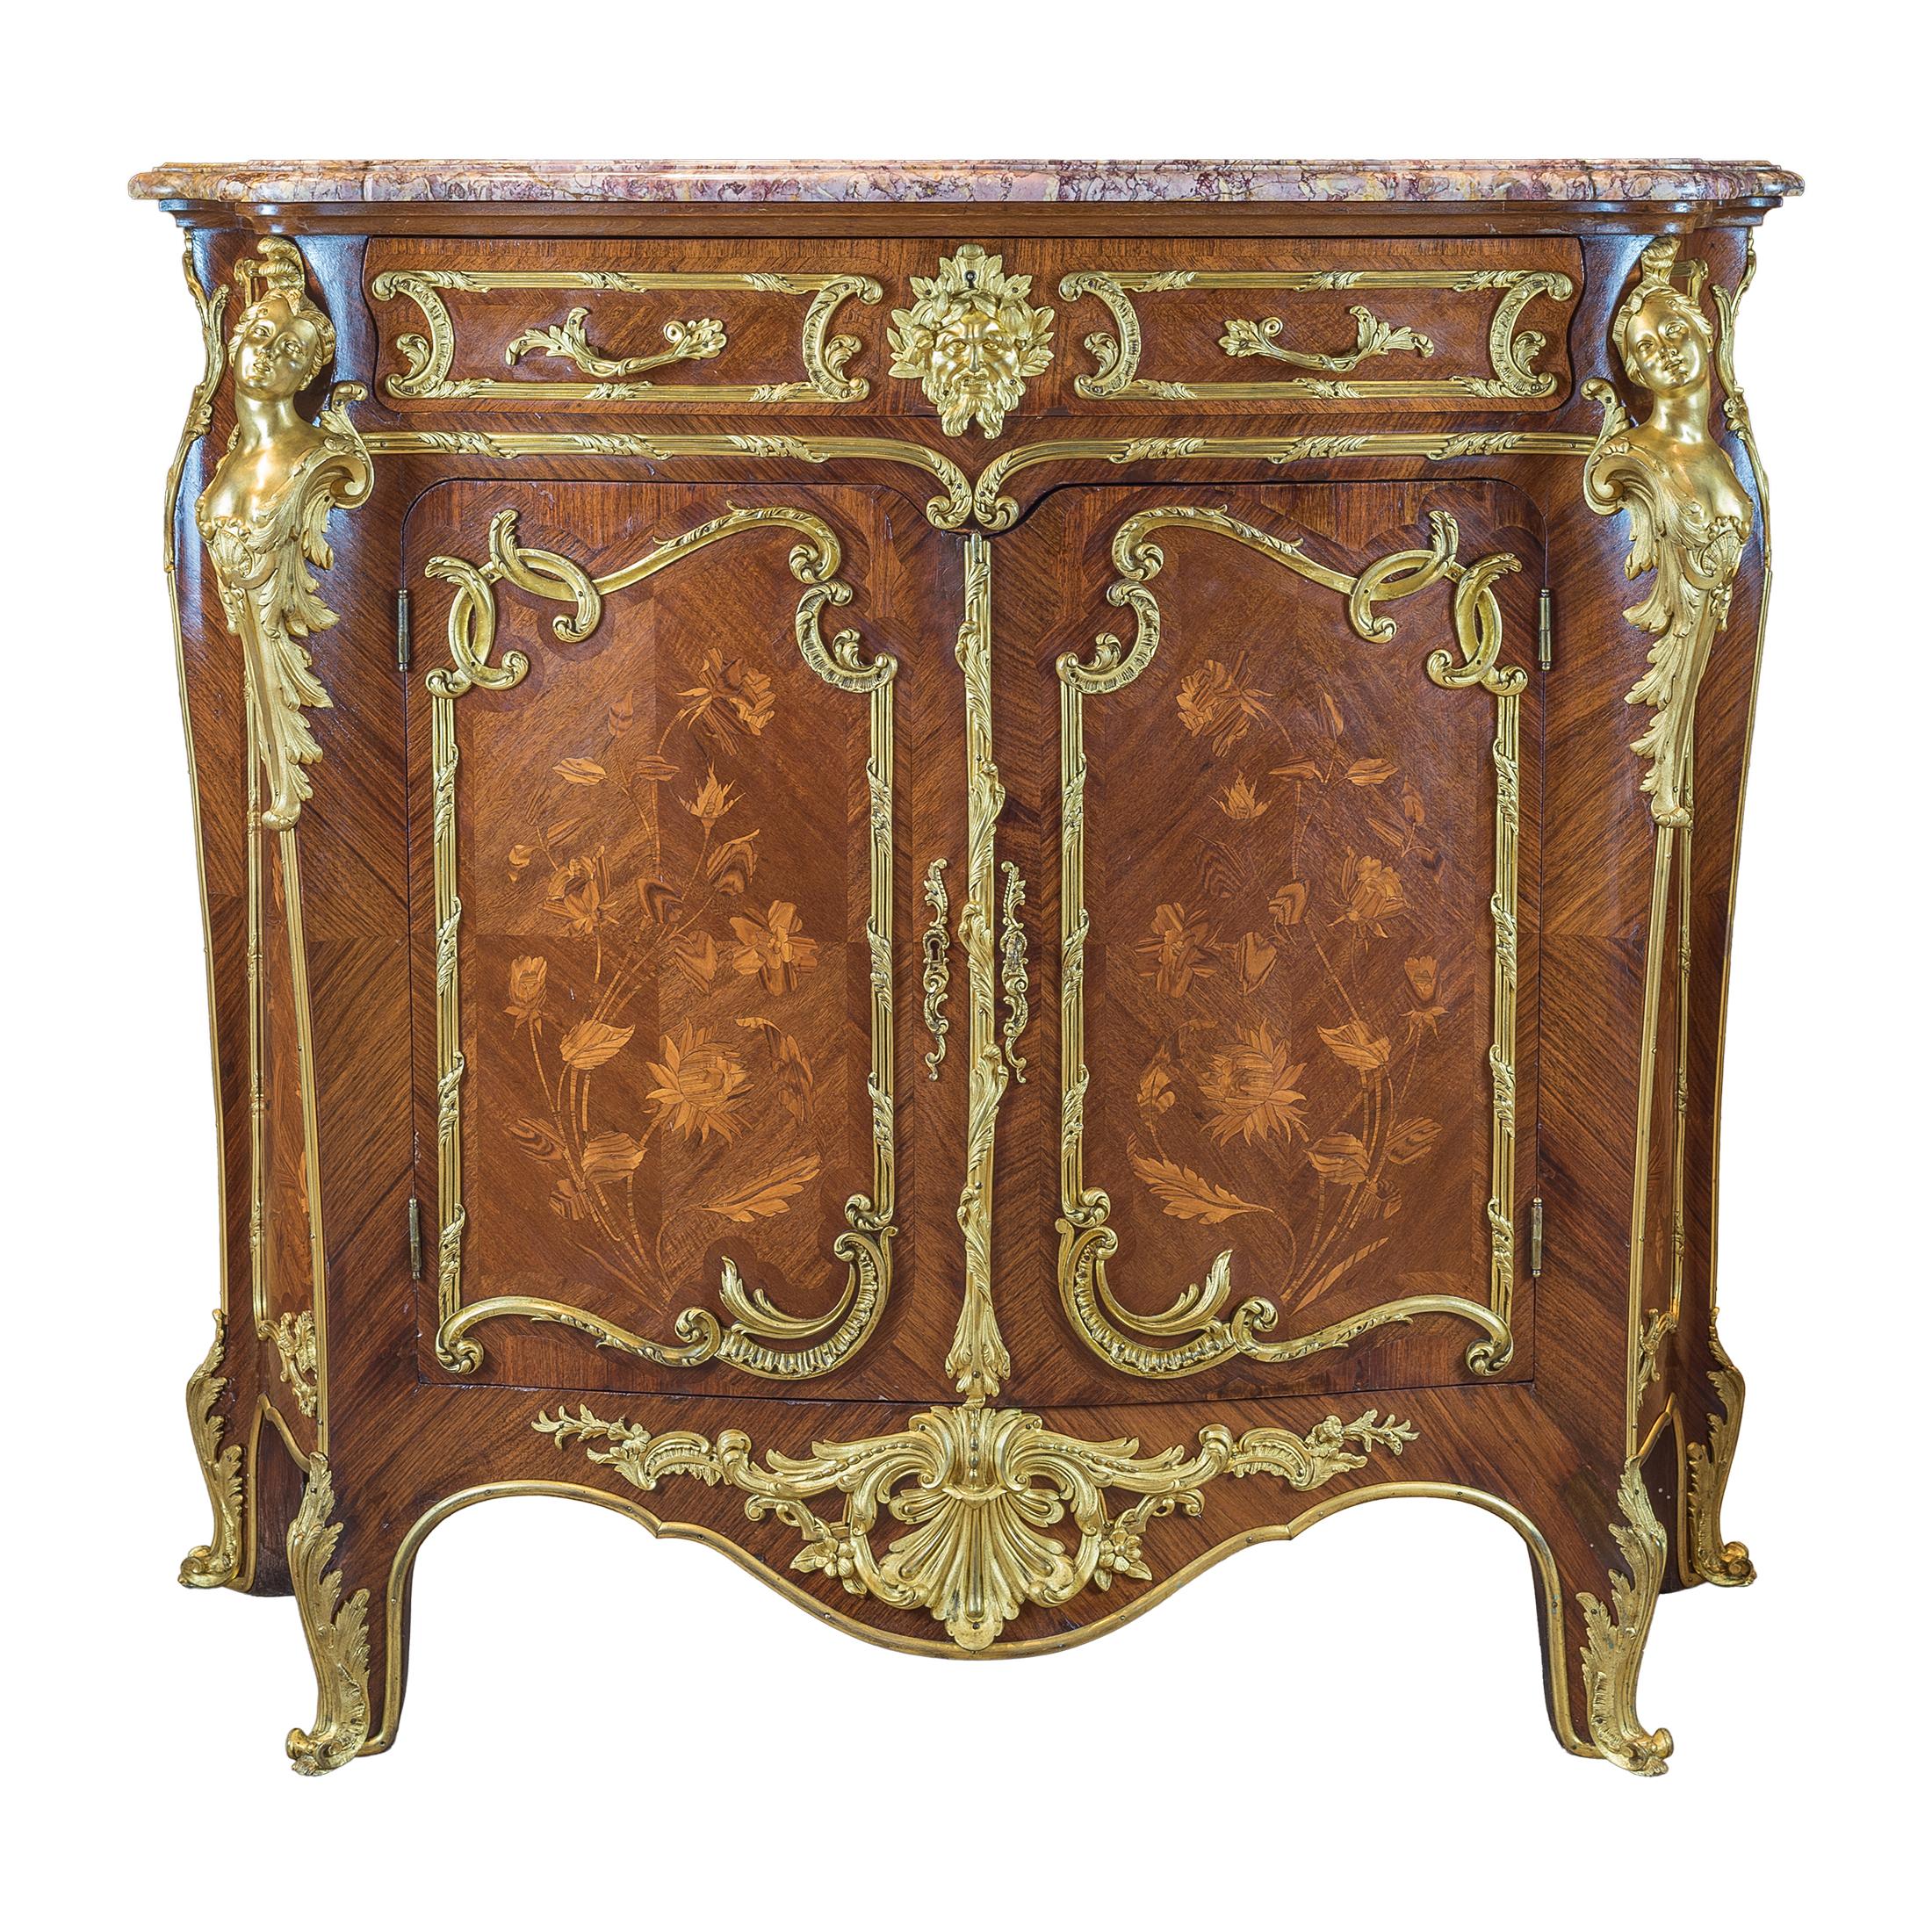 French Pair of Louis XV-Style Ormolu-Mounted Marble-Top Credenza by Fontainebleau For Sale